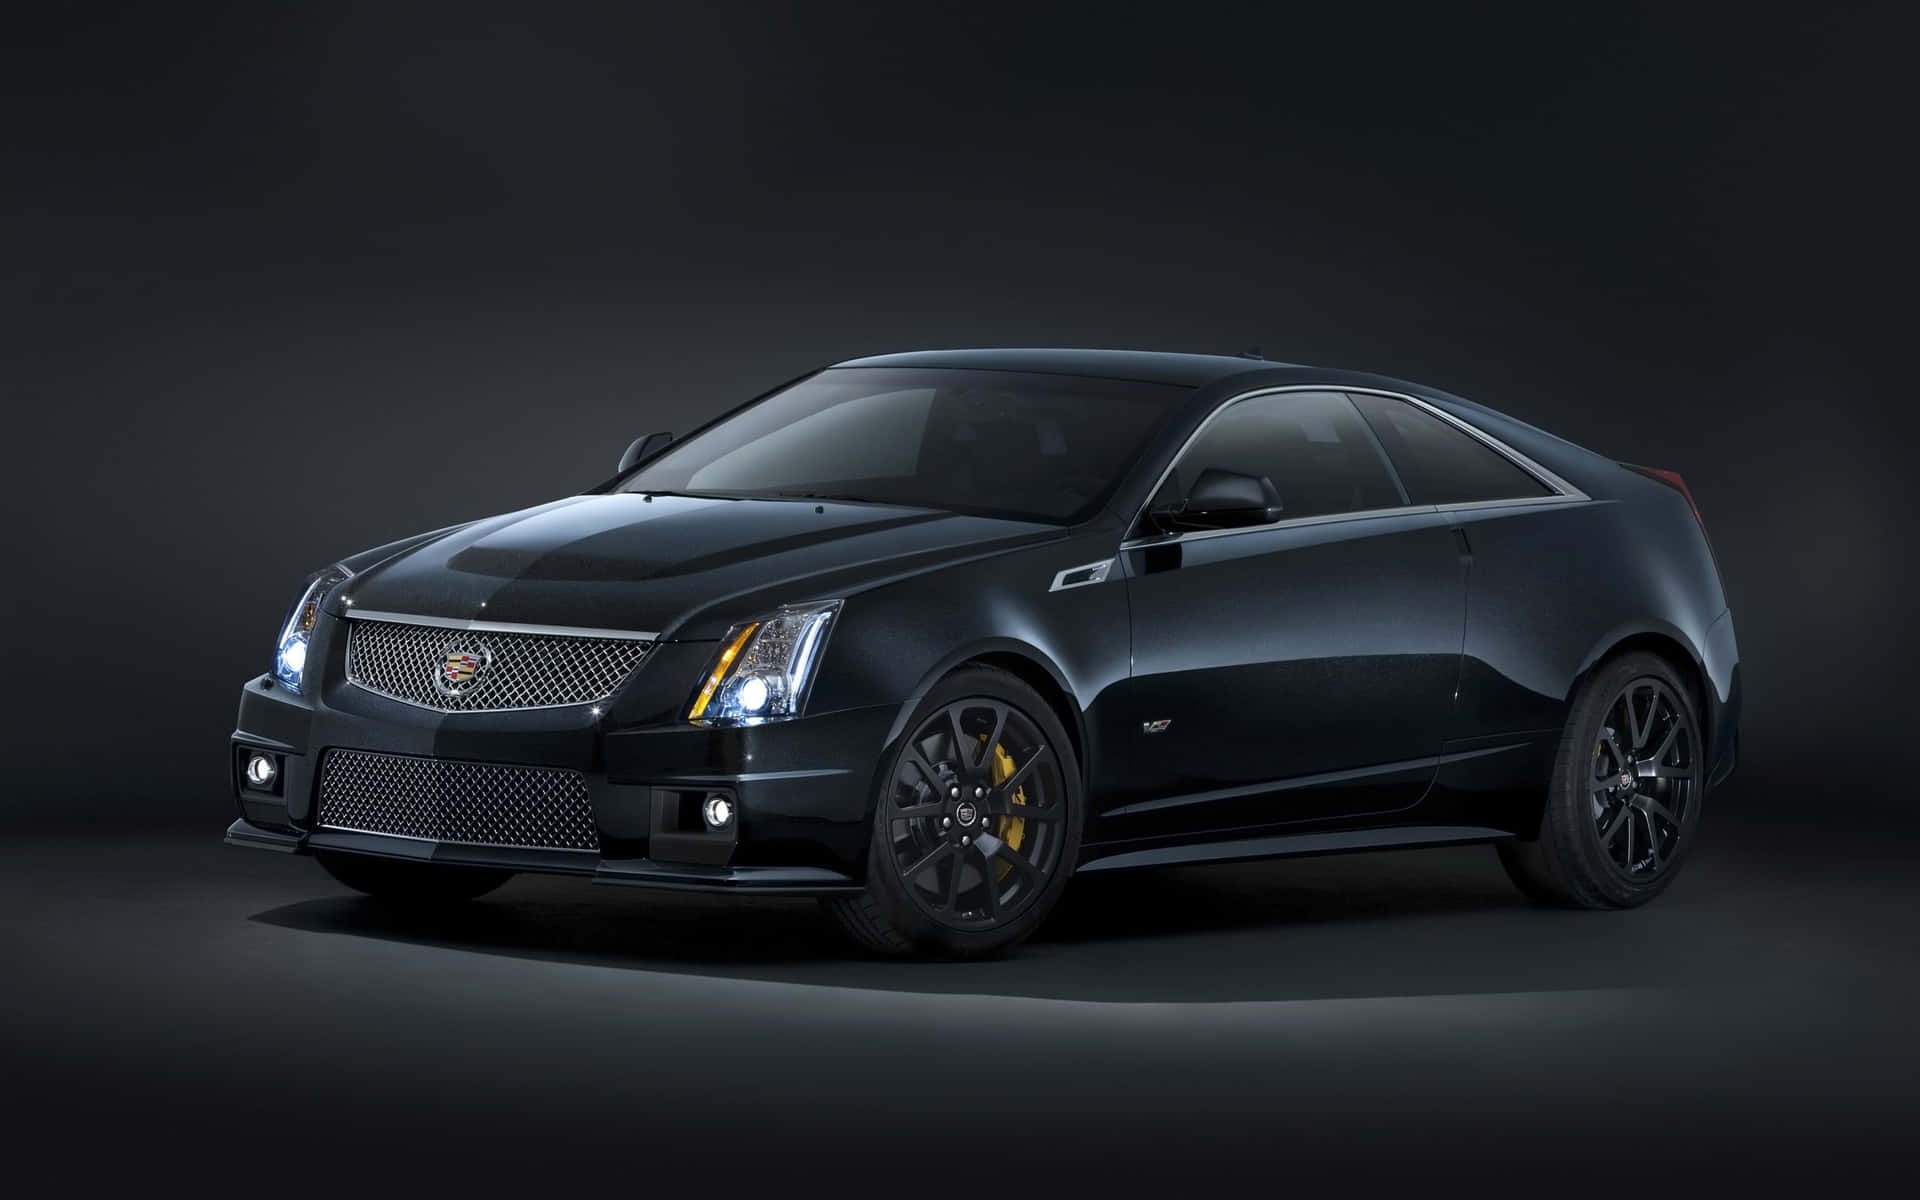 Stunning Cadillac CTS in motion Wallpaper